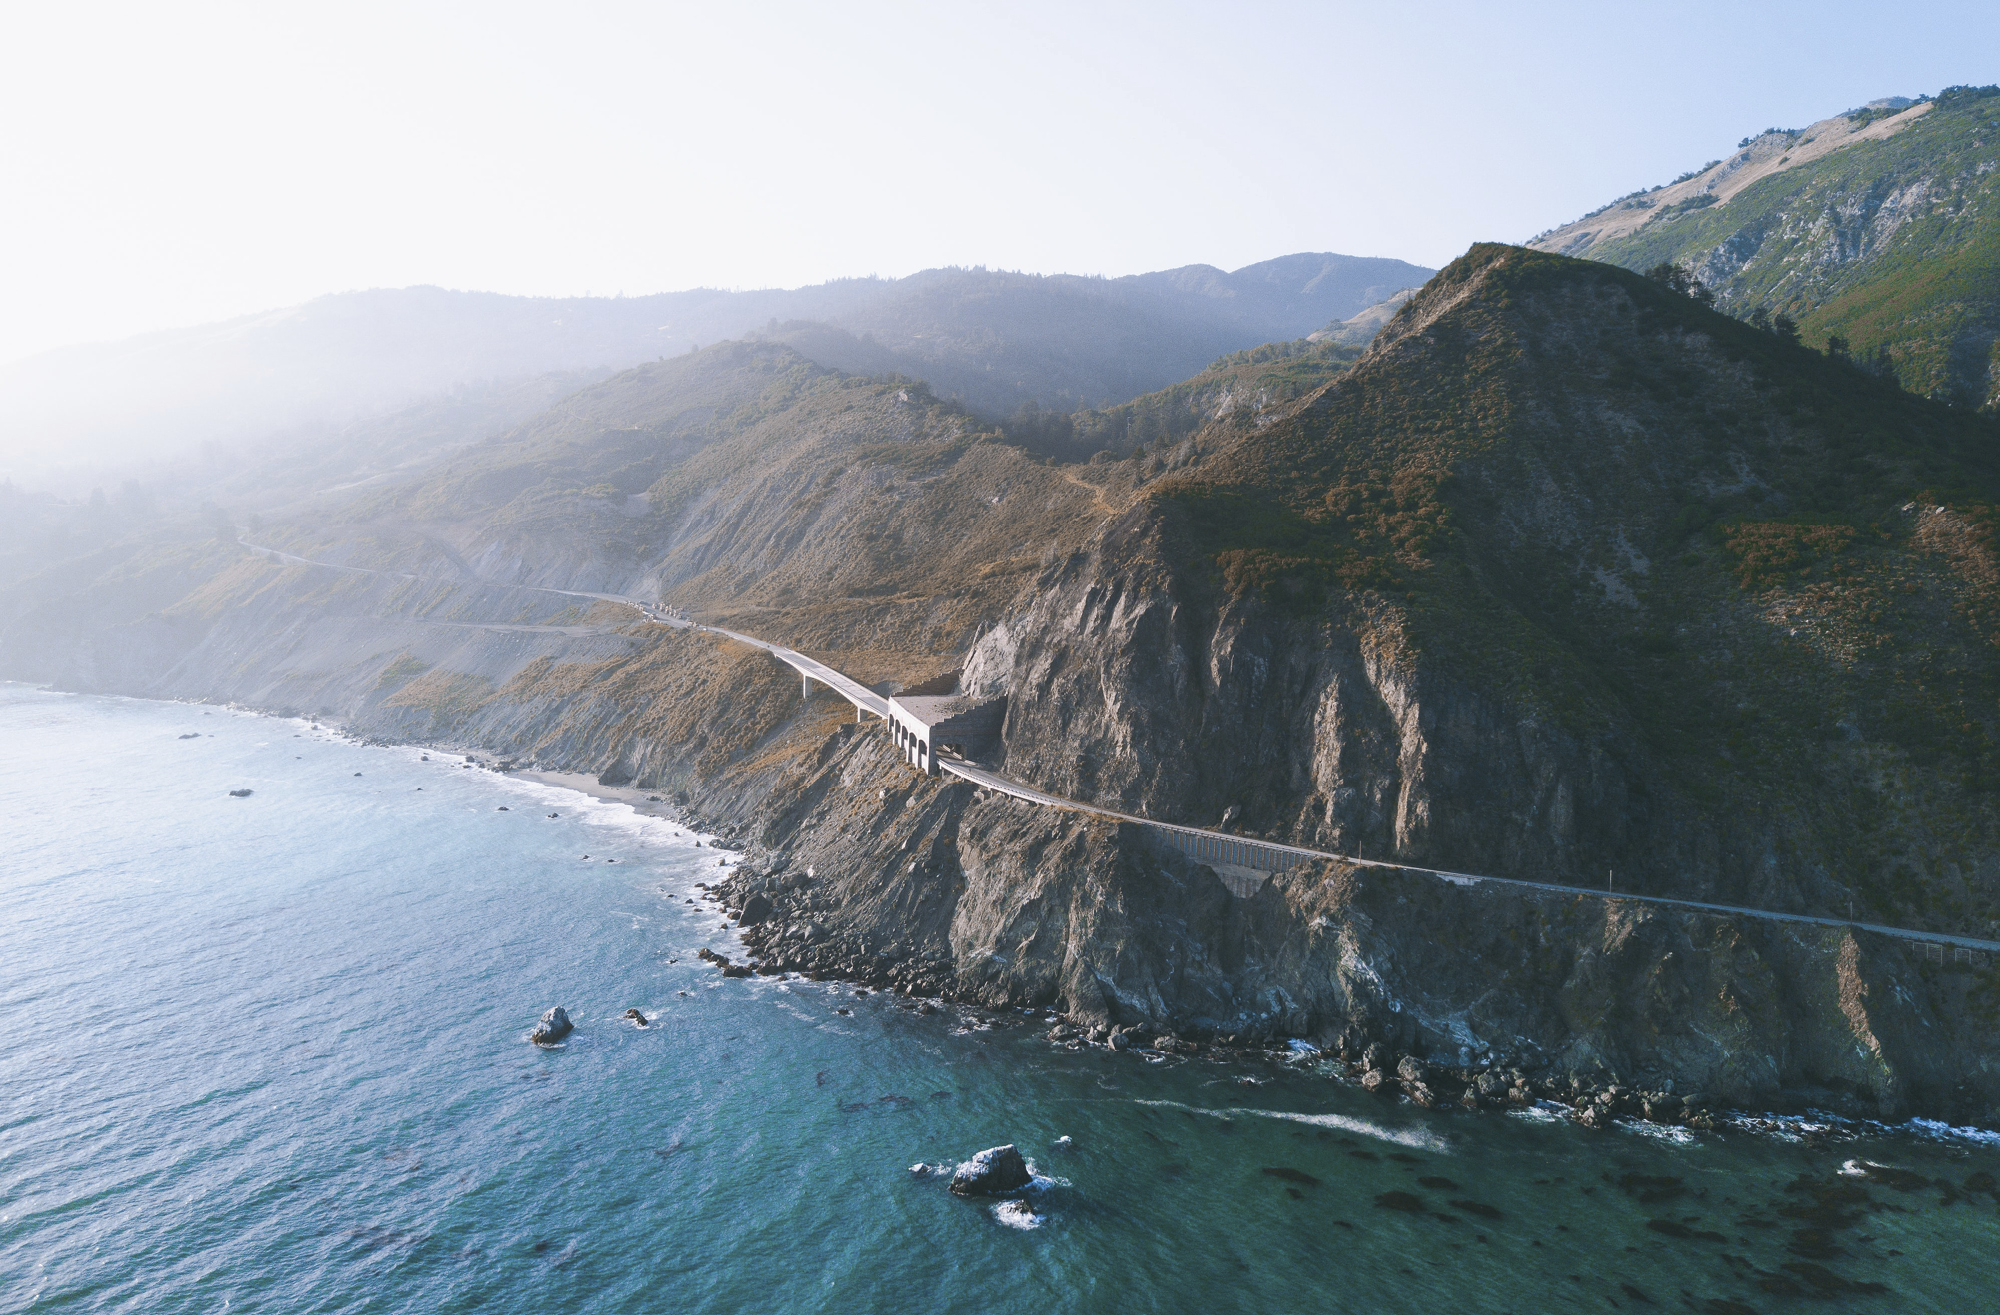 A road trip on the Pacific Coast Highway